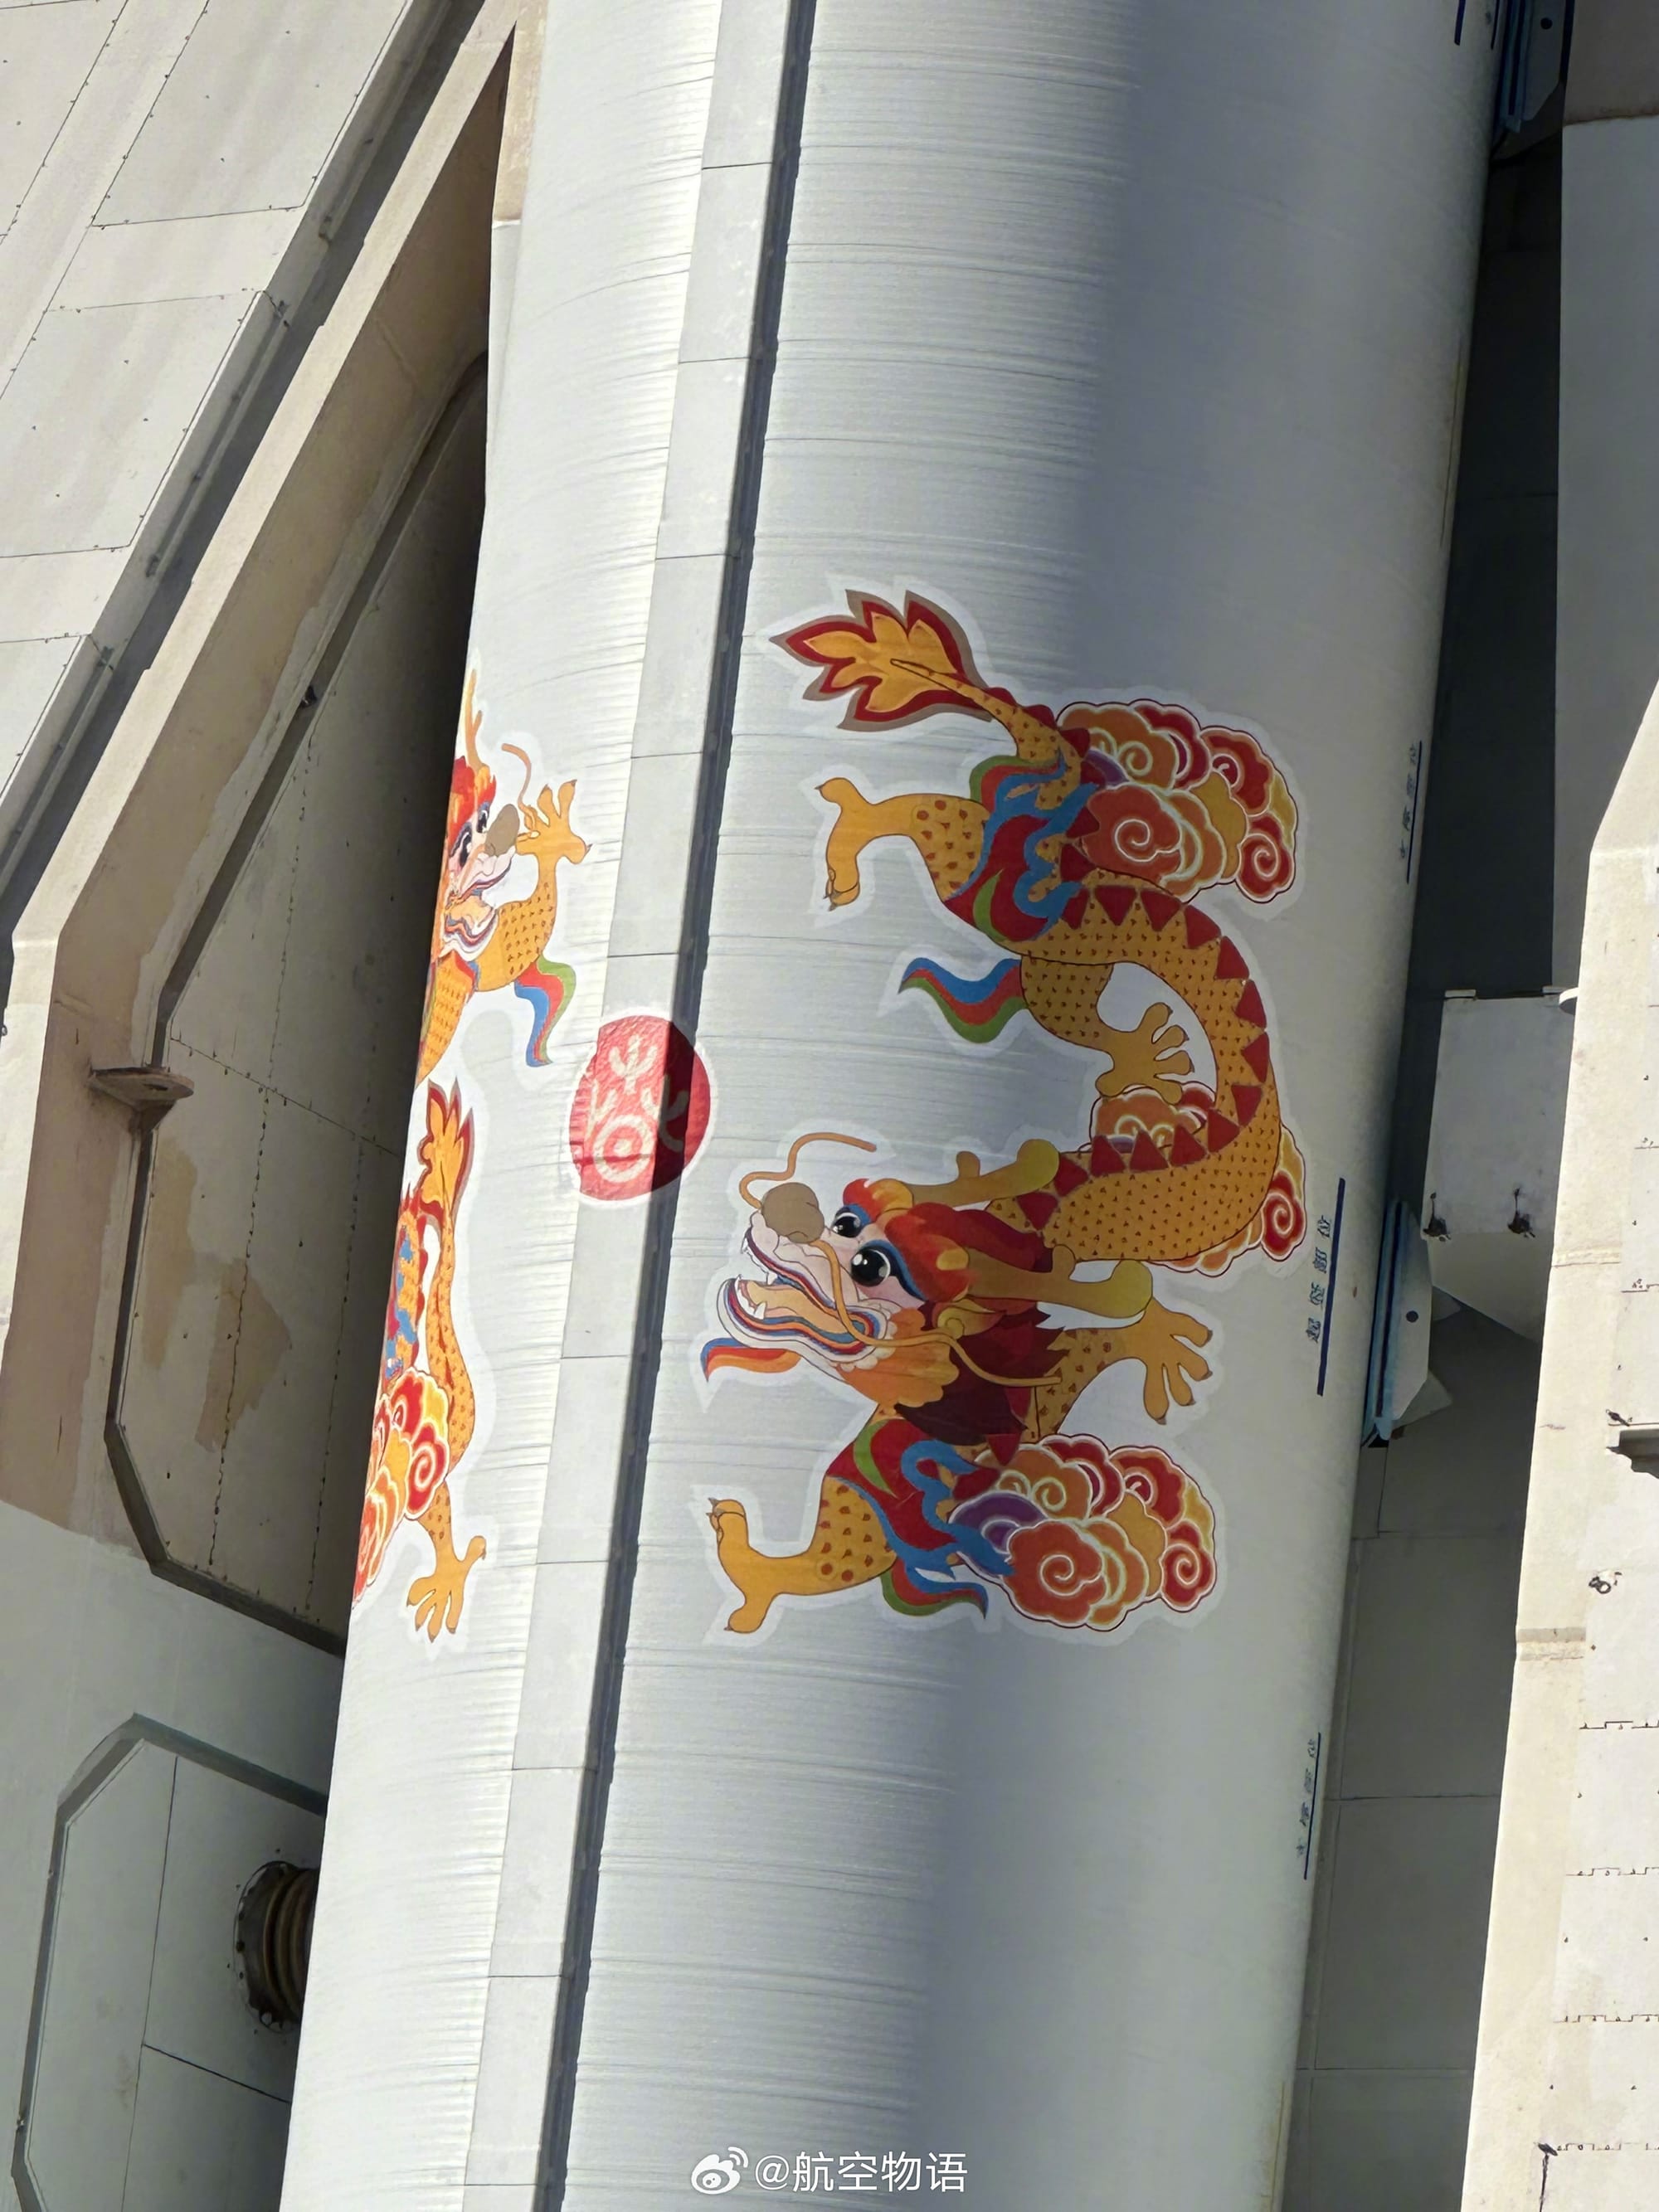 A traditional Chinese Loong on the side of the Kinetica-1 first stage. Via 航空物语 on Weibo